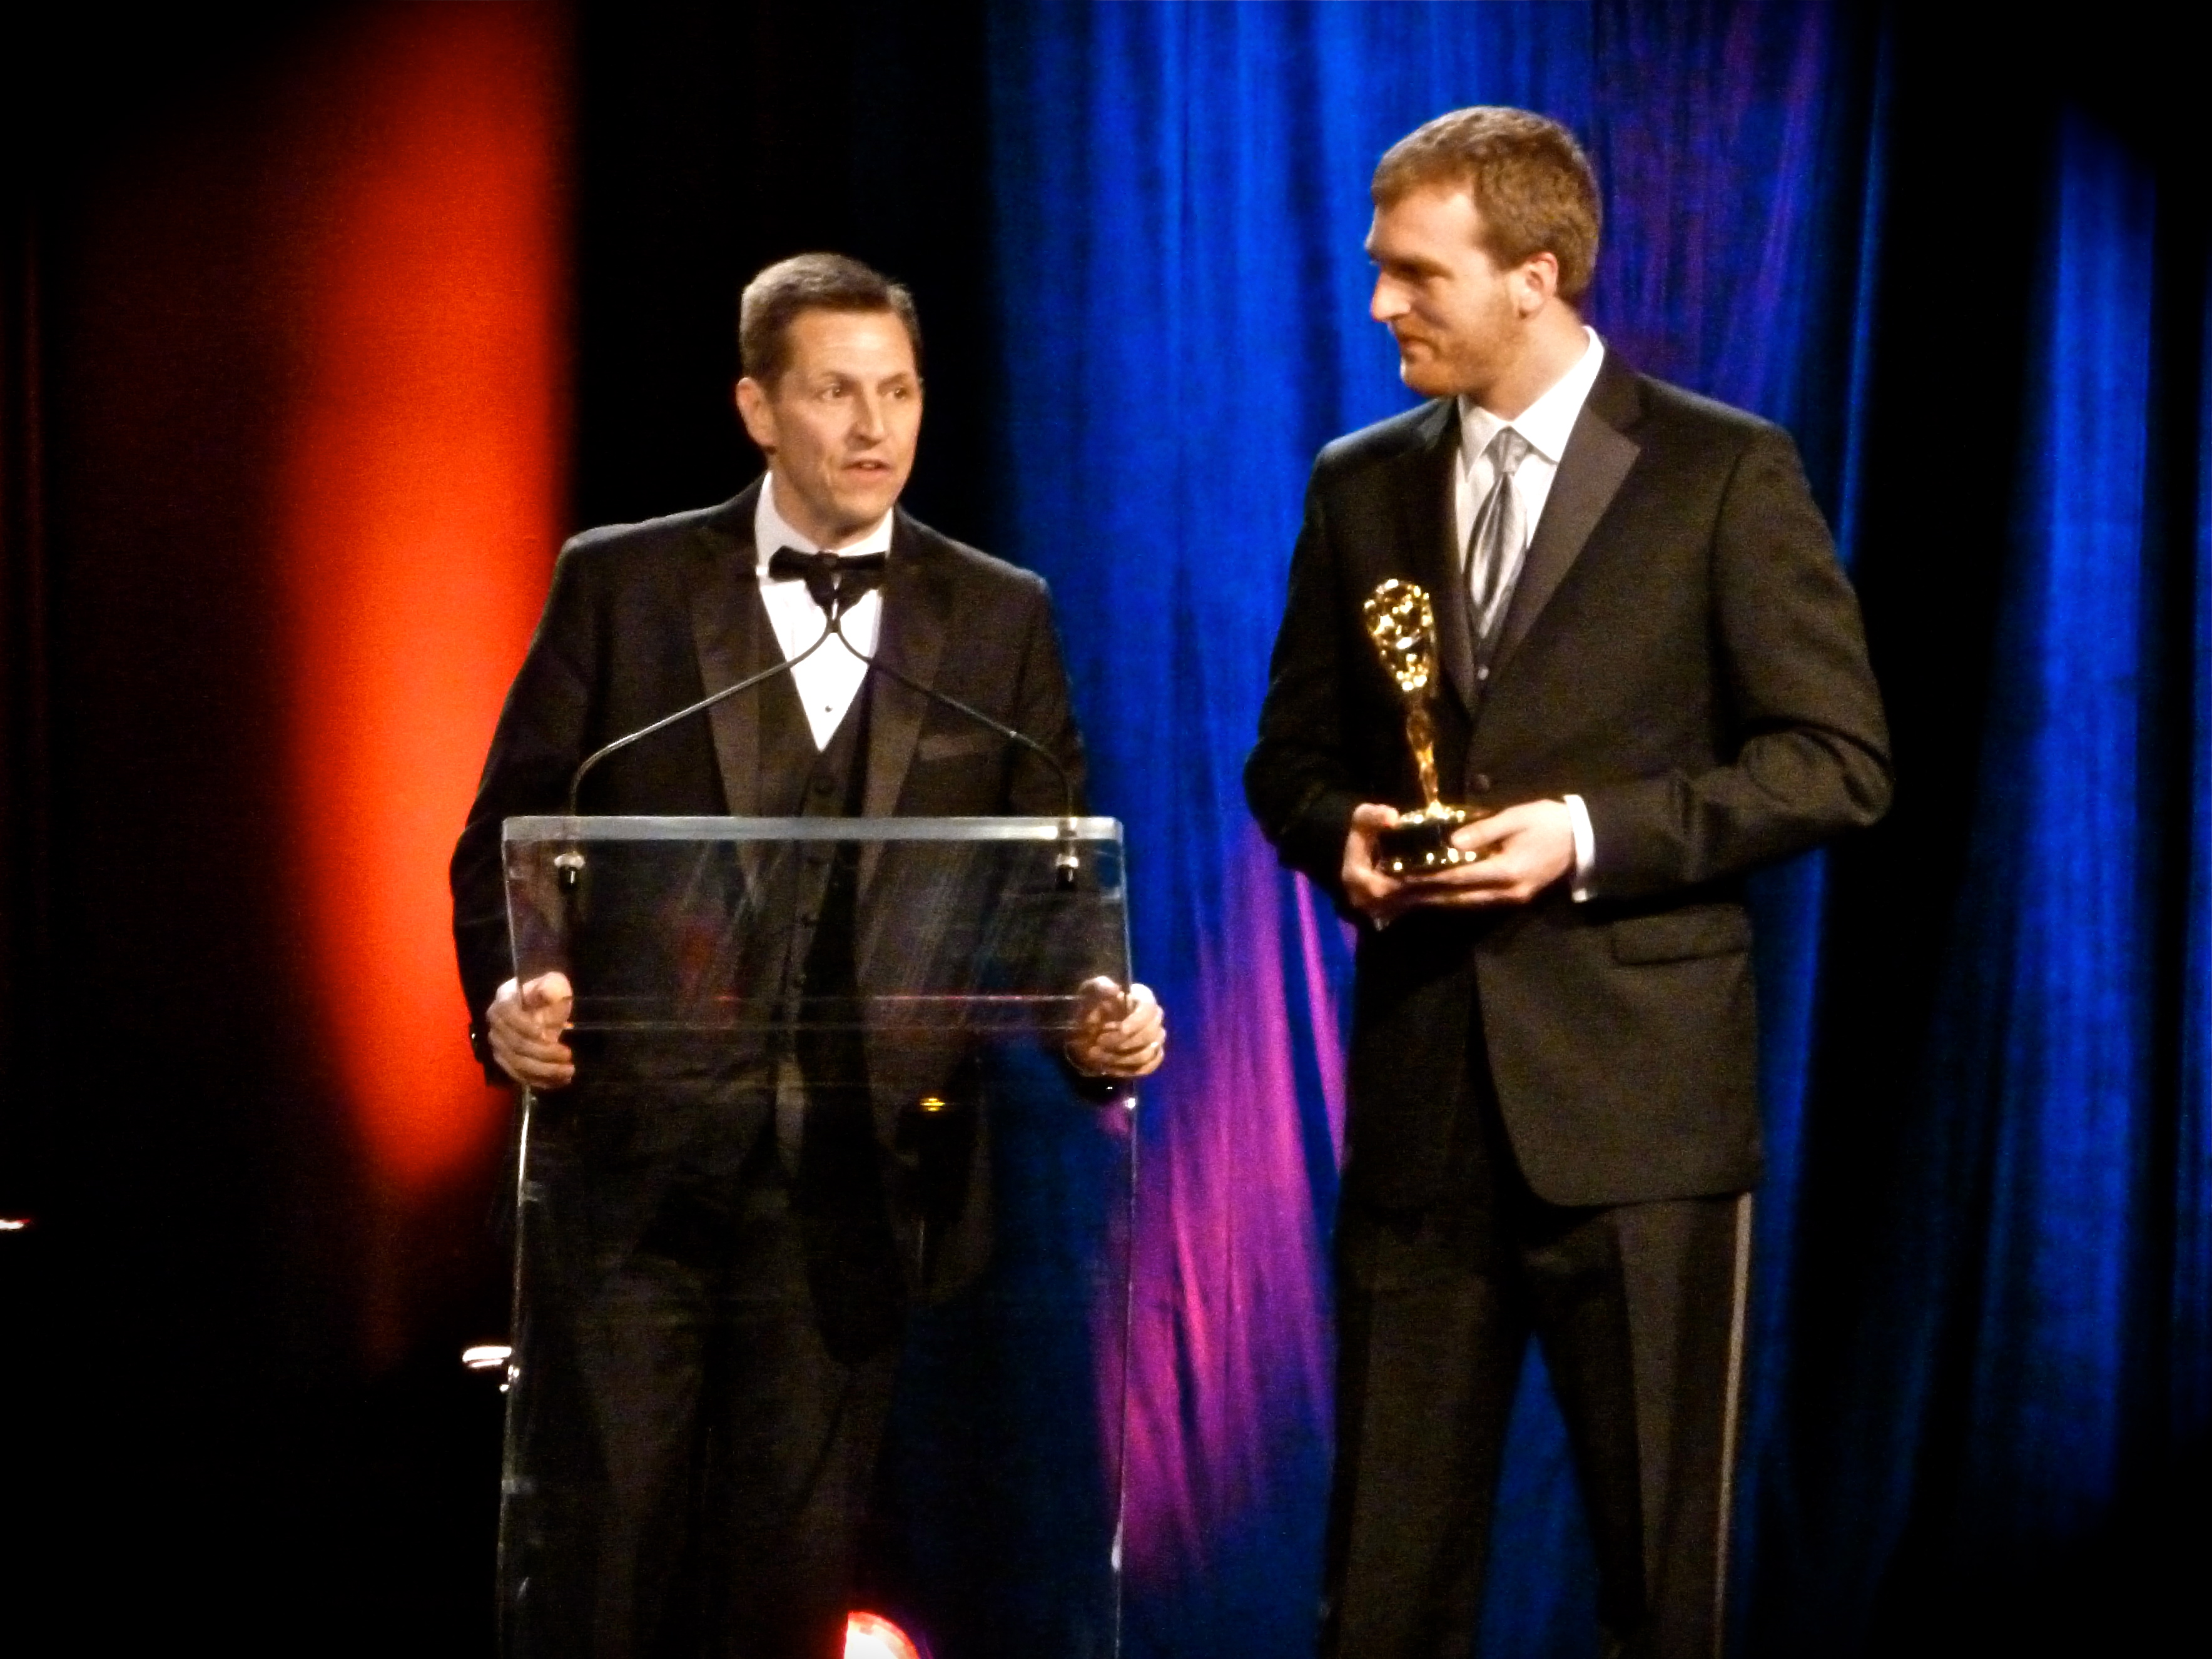 Michael Wickham (right) accepts the Emmy Award along with Rich Becker for their feature story 